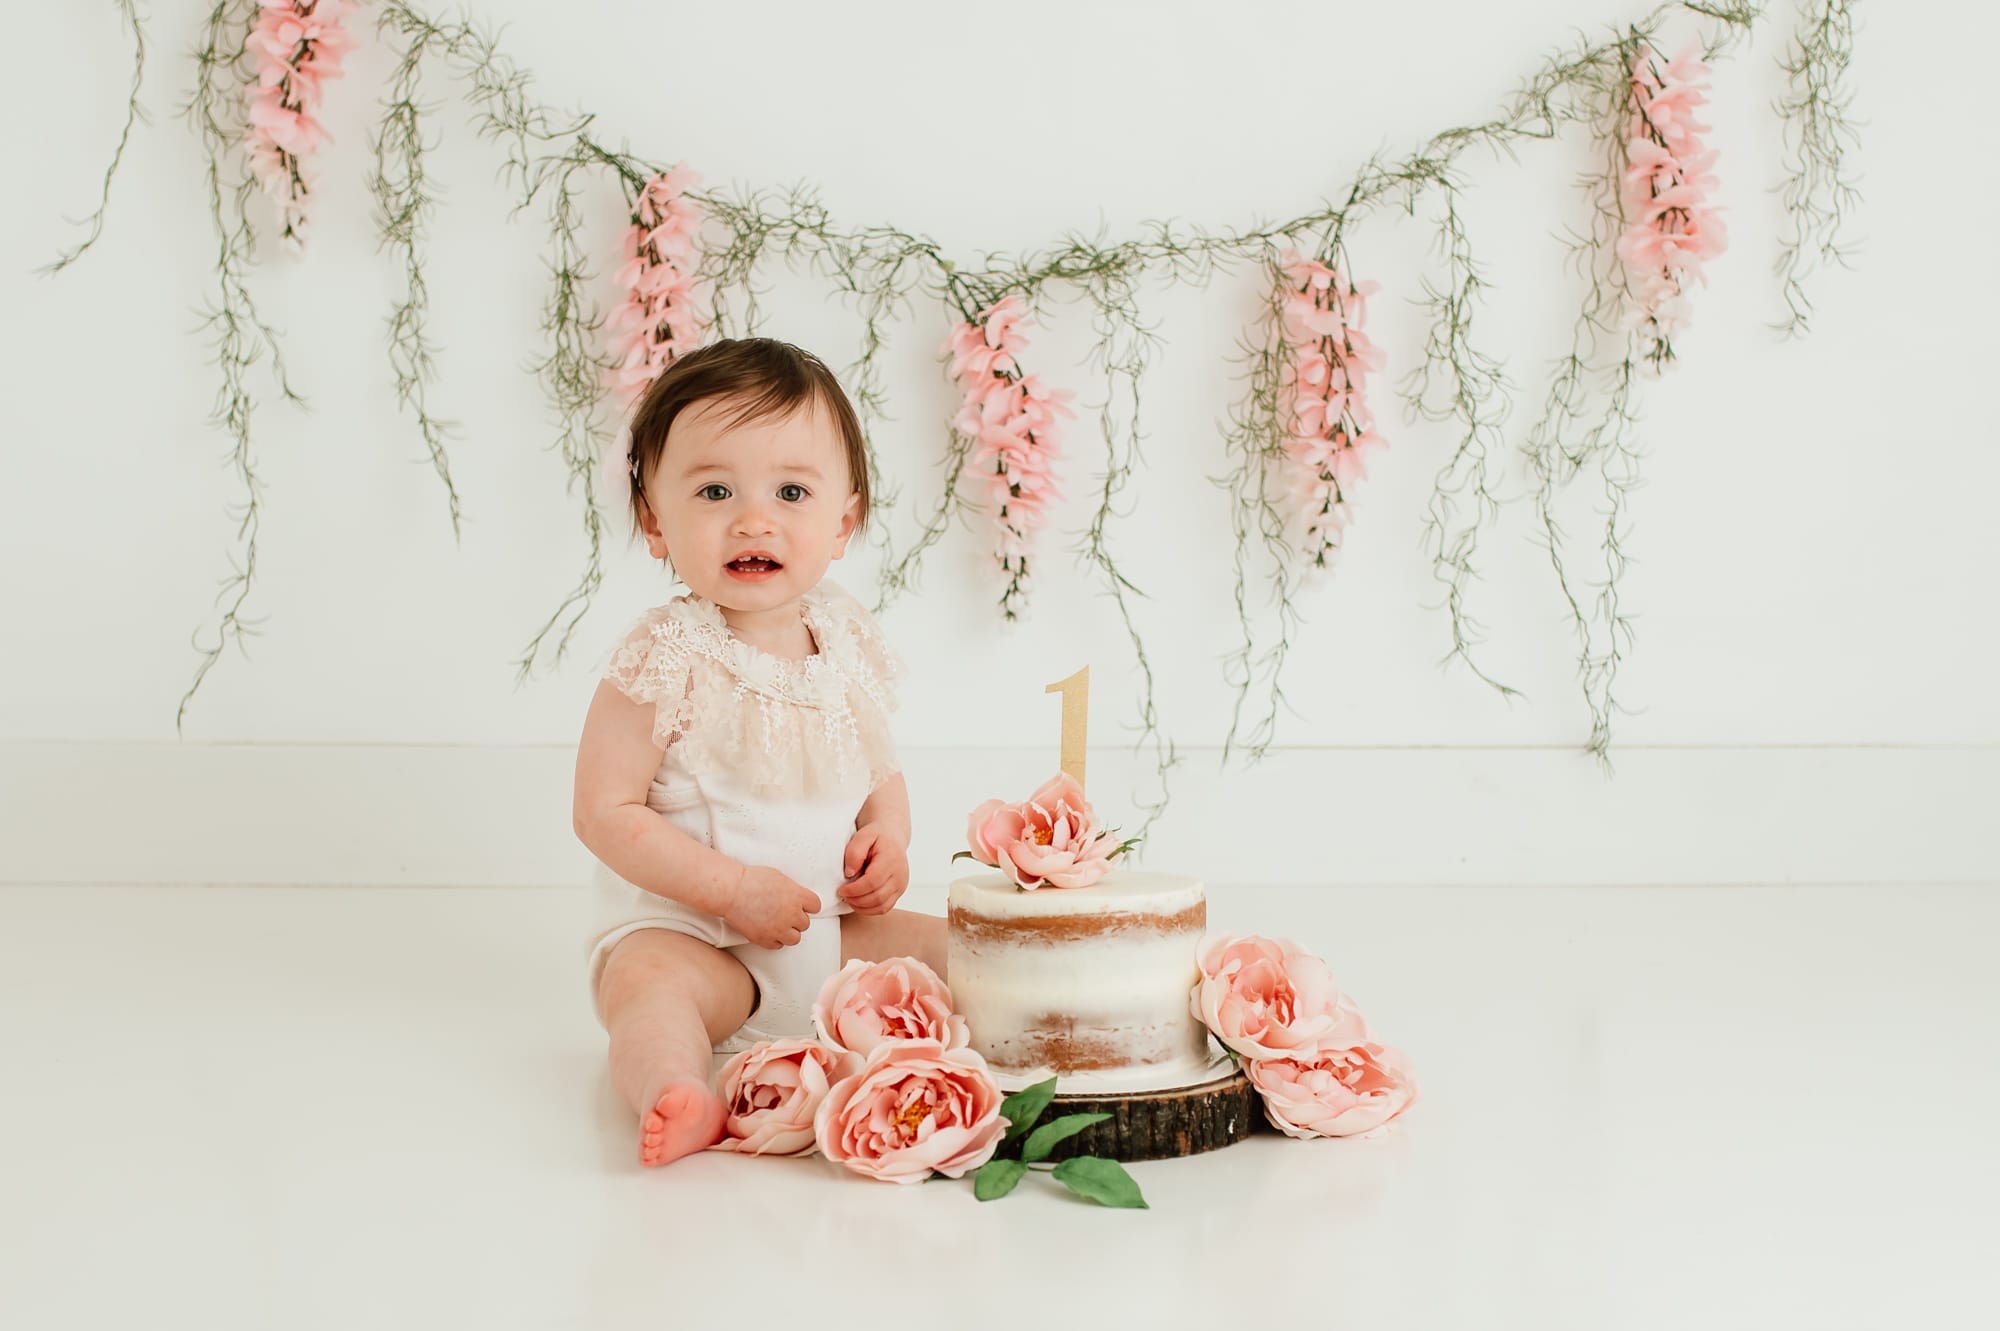 Floral and spanish moss backdrop behind one year old girl smiling during her Vancouver cake smash session.